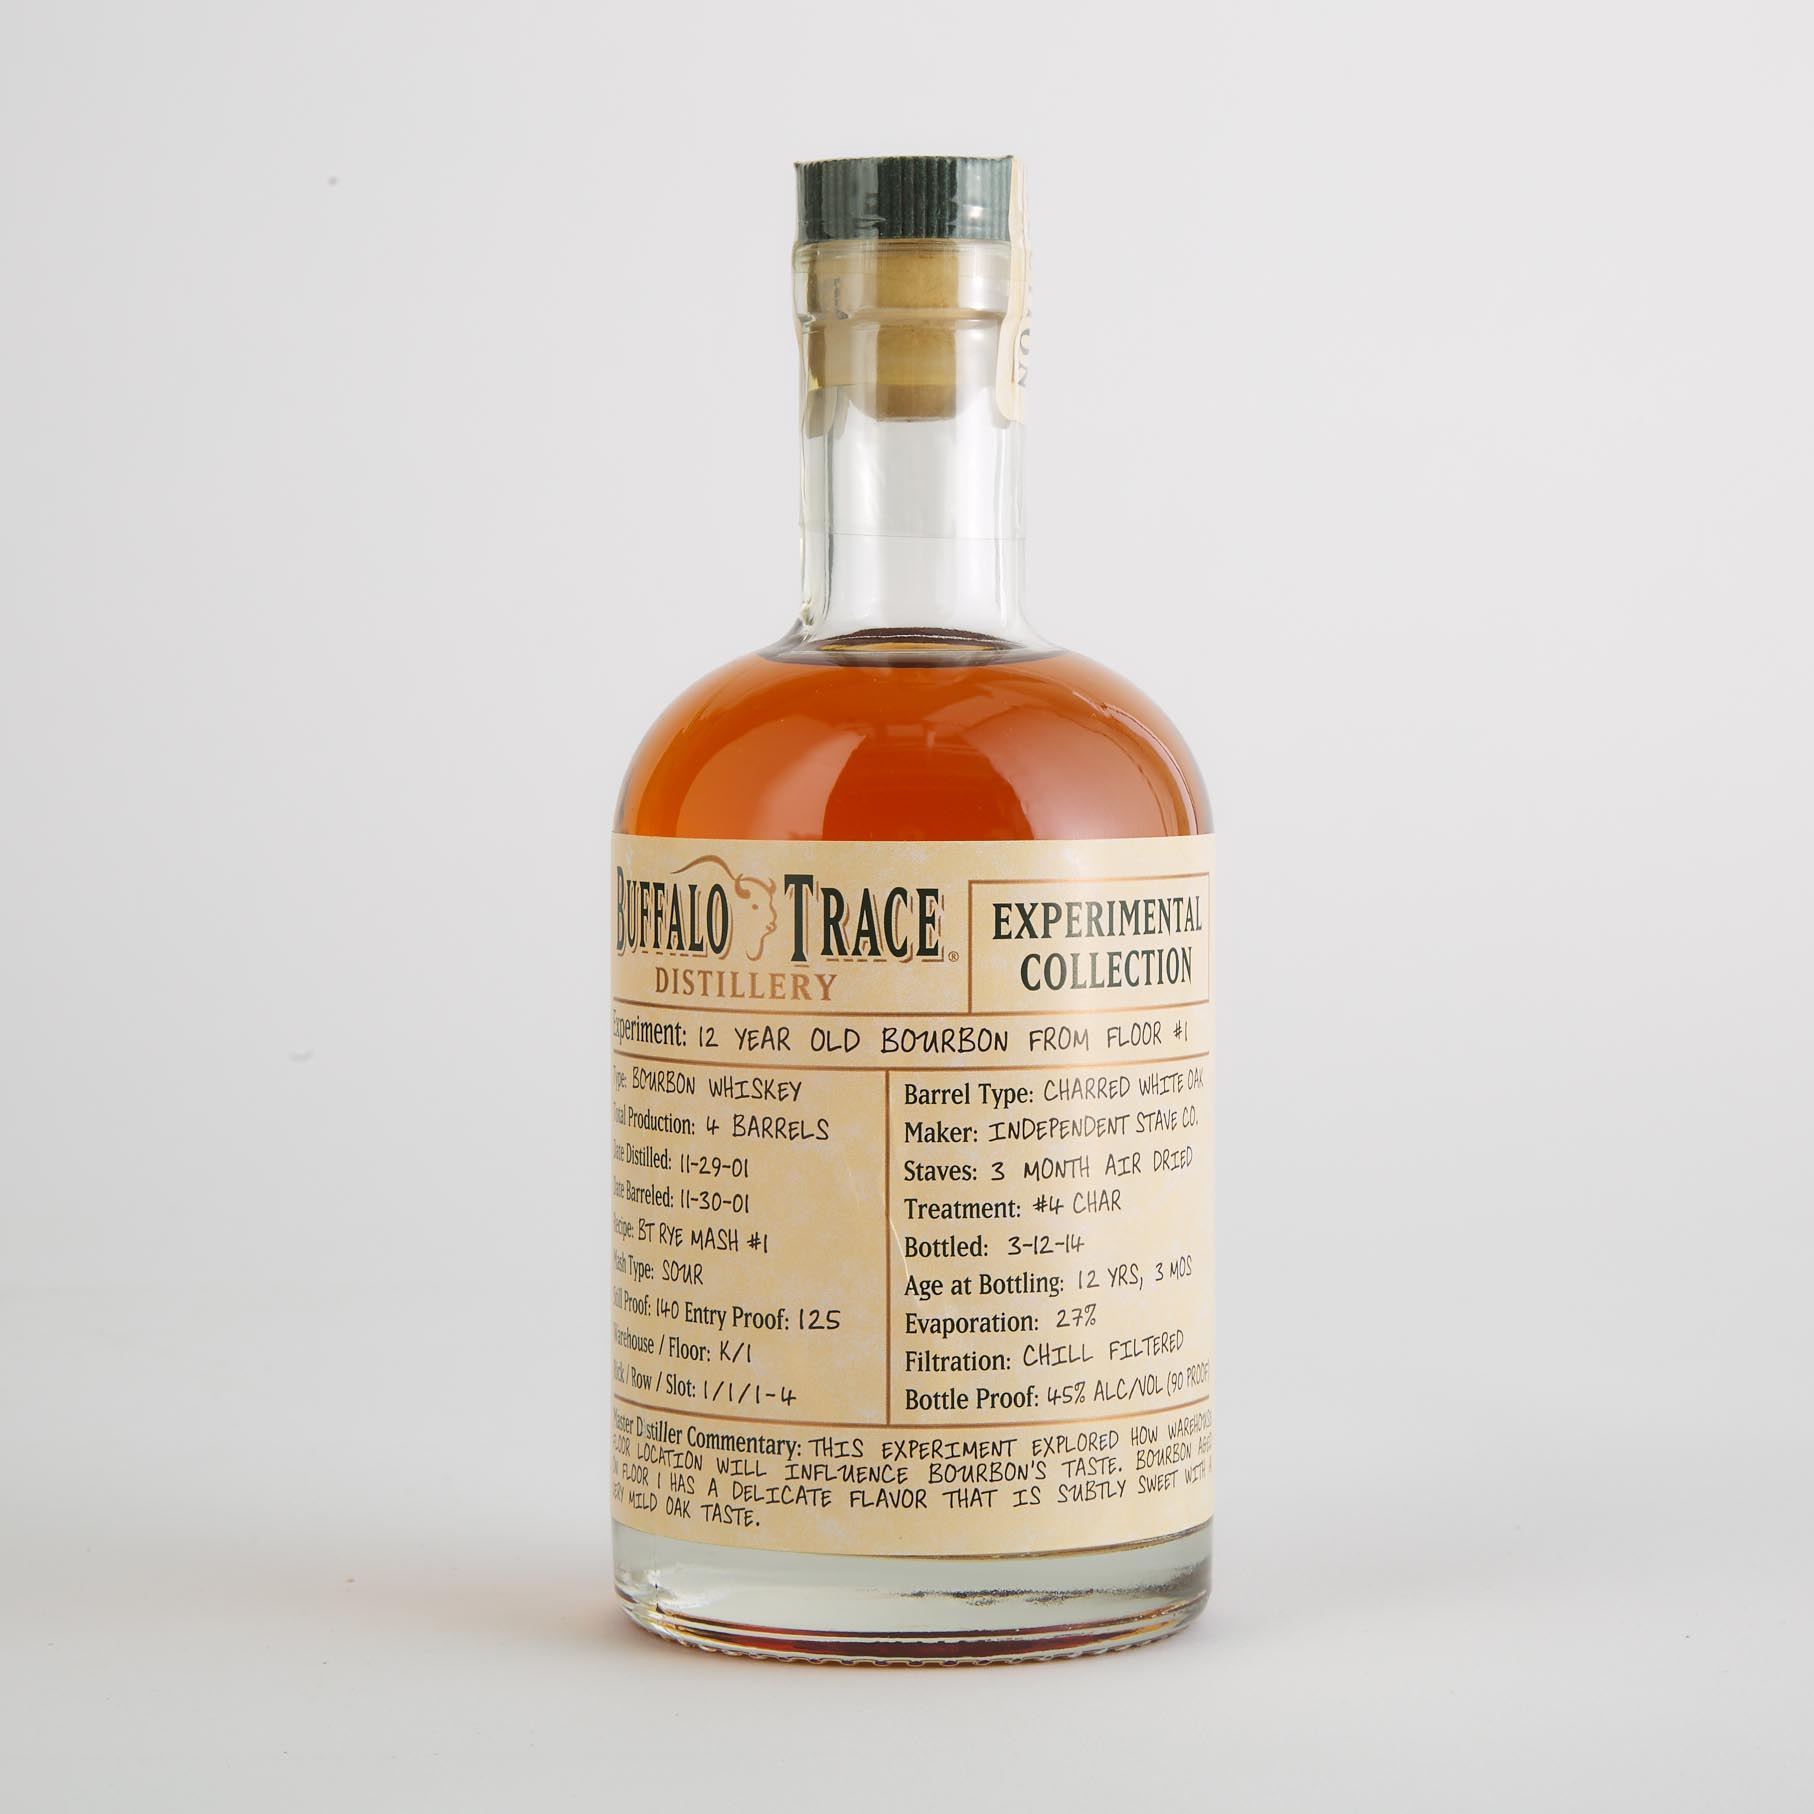 BUFFALO TRACE EXPERIMENTAL COLLECTION BOURBON 12 YEARS (ONE 375 ML)